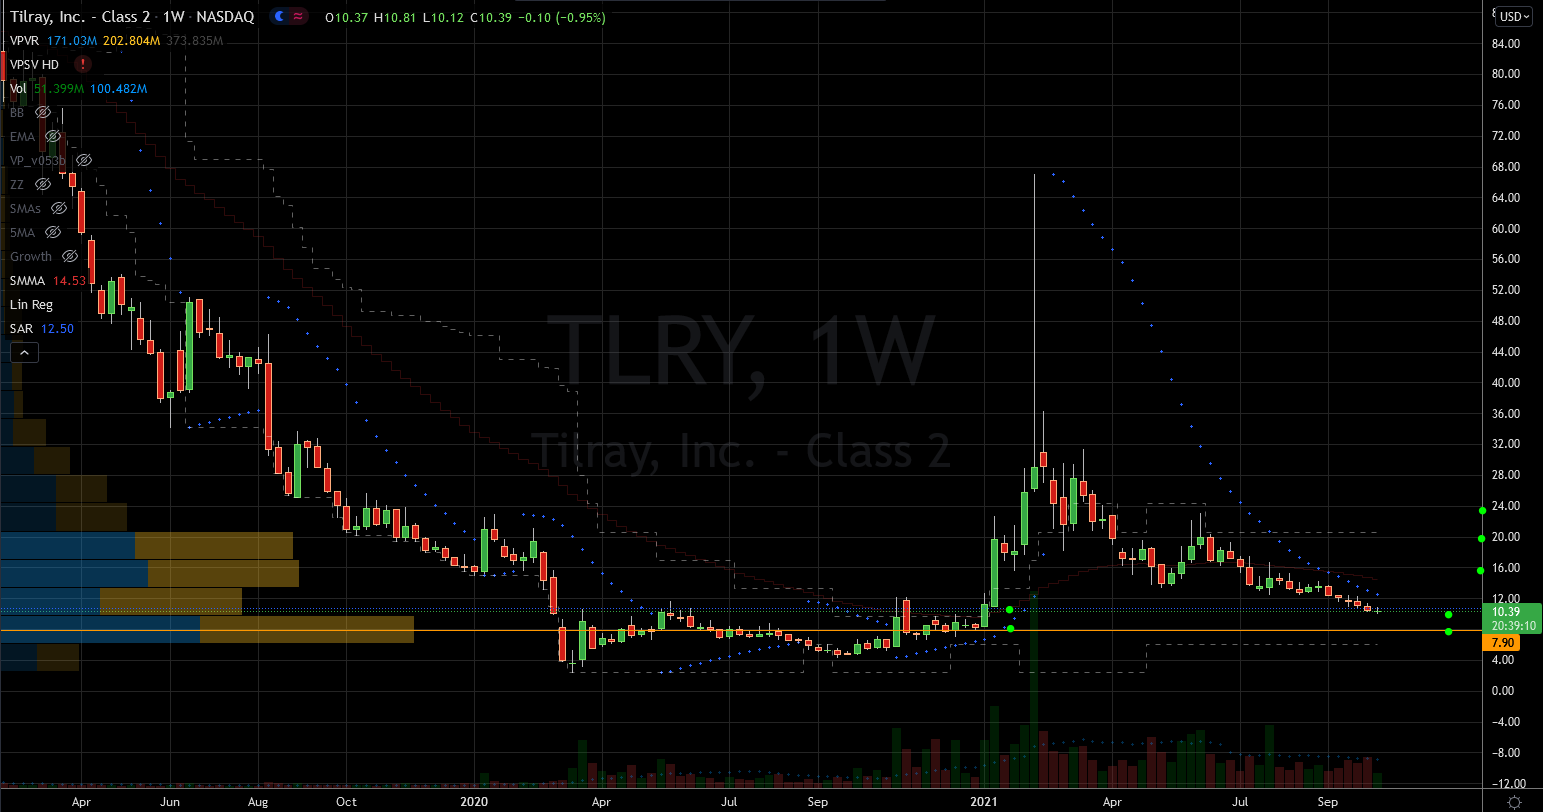 Tilray (TLRY) Stock Showing No Clear Bottom Yet